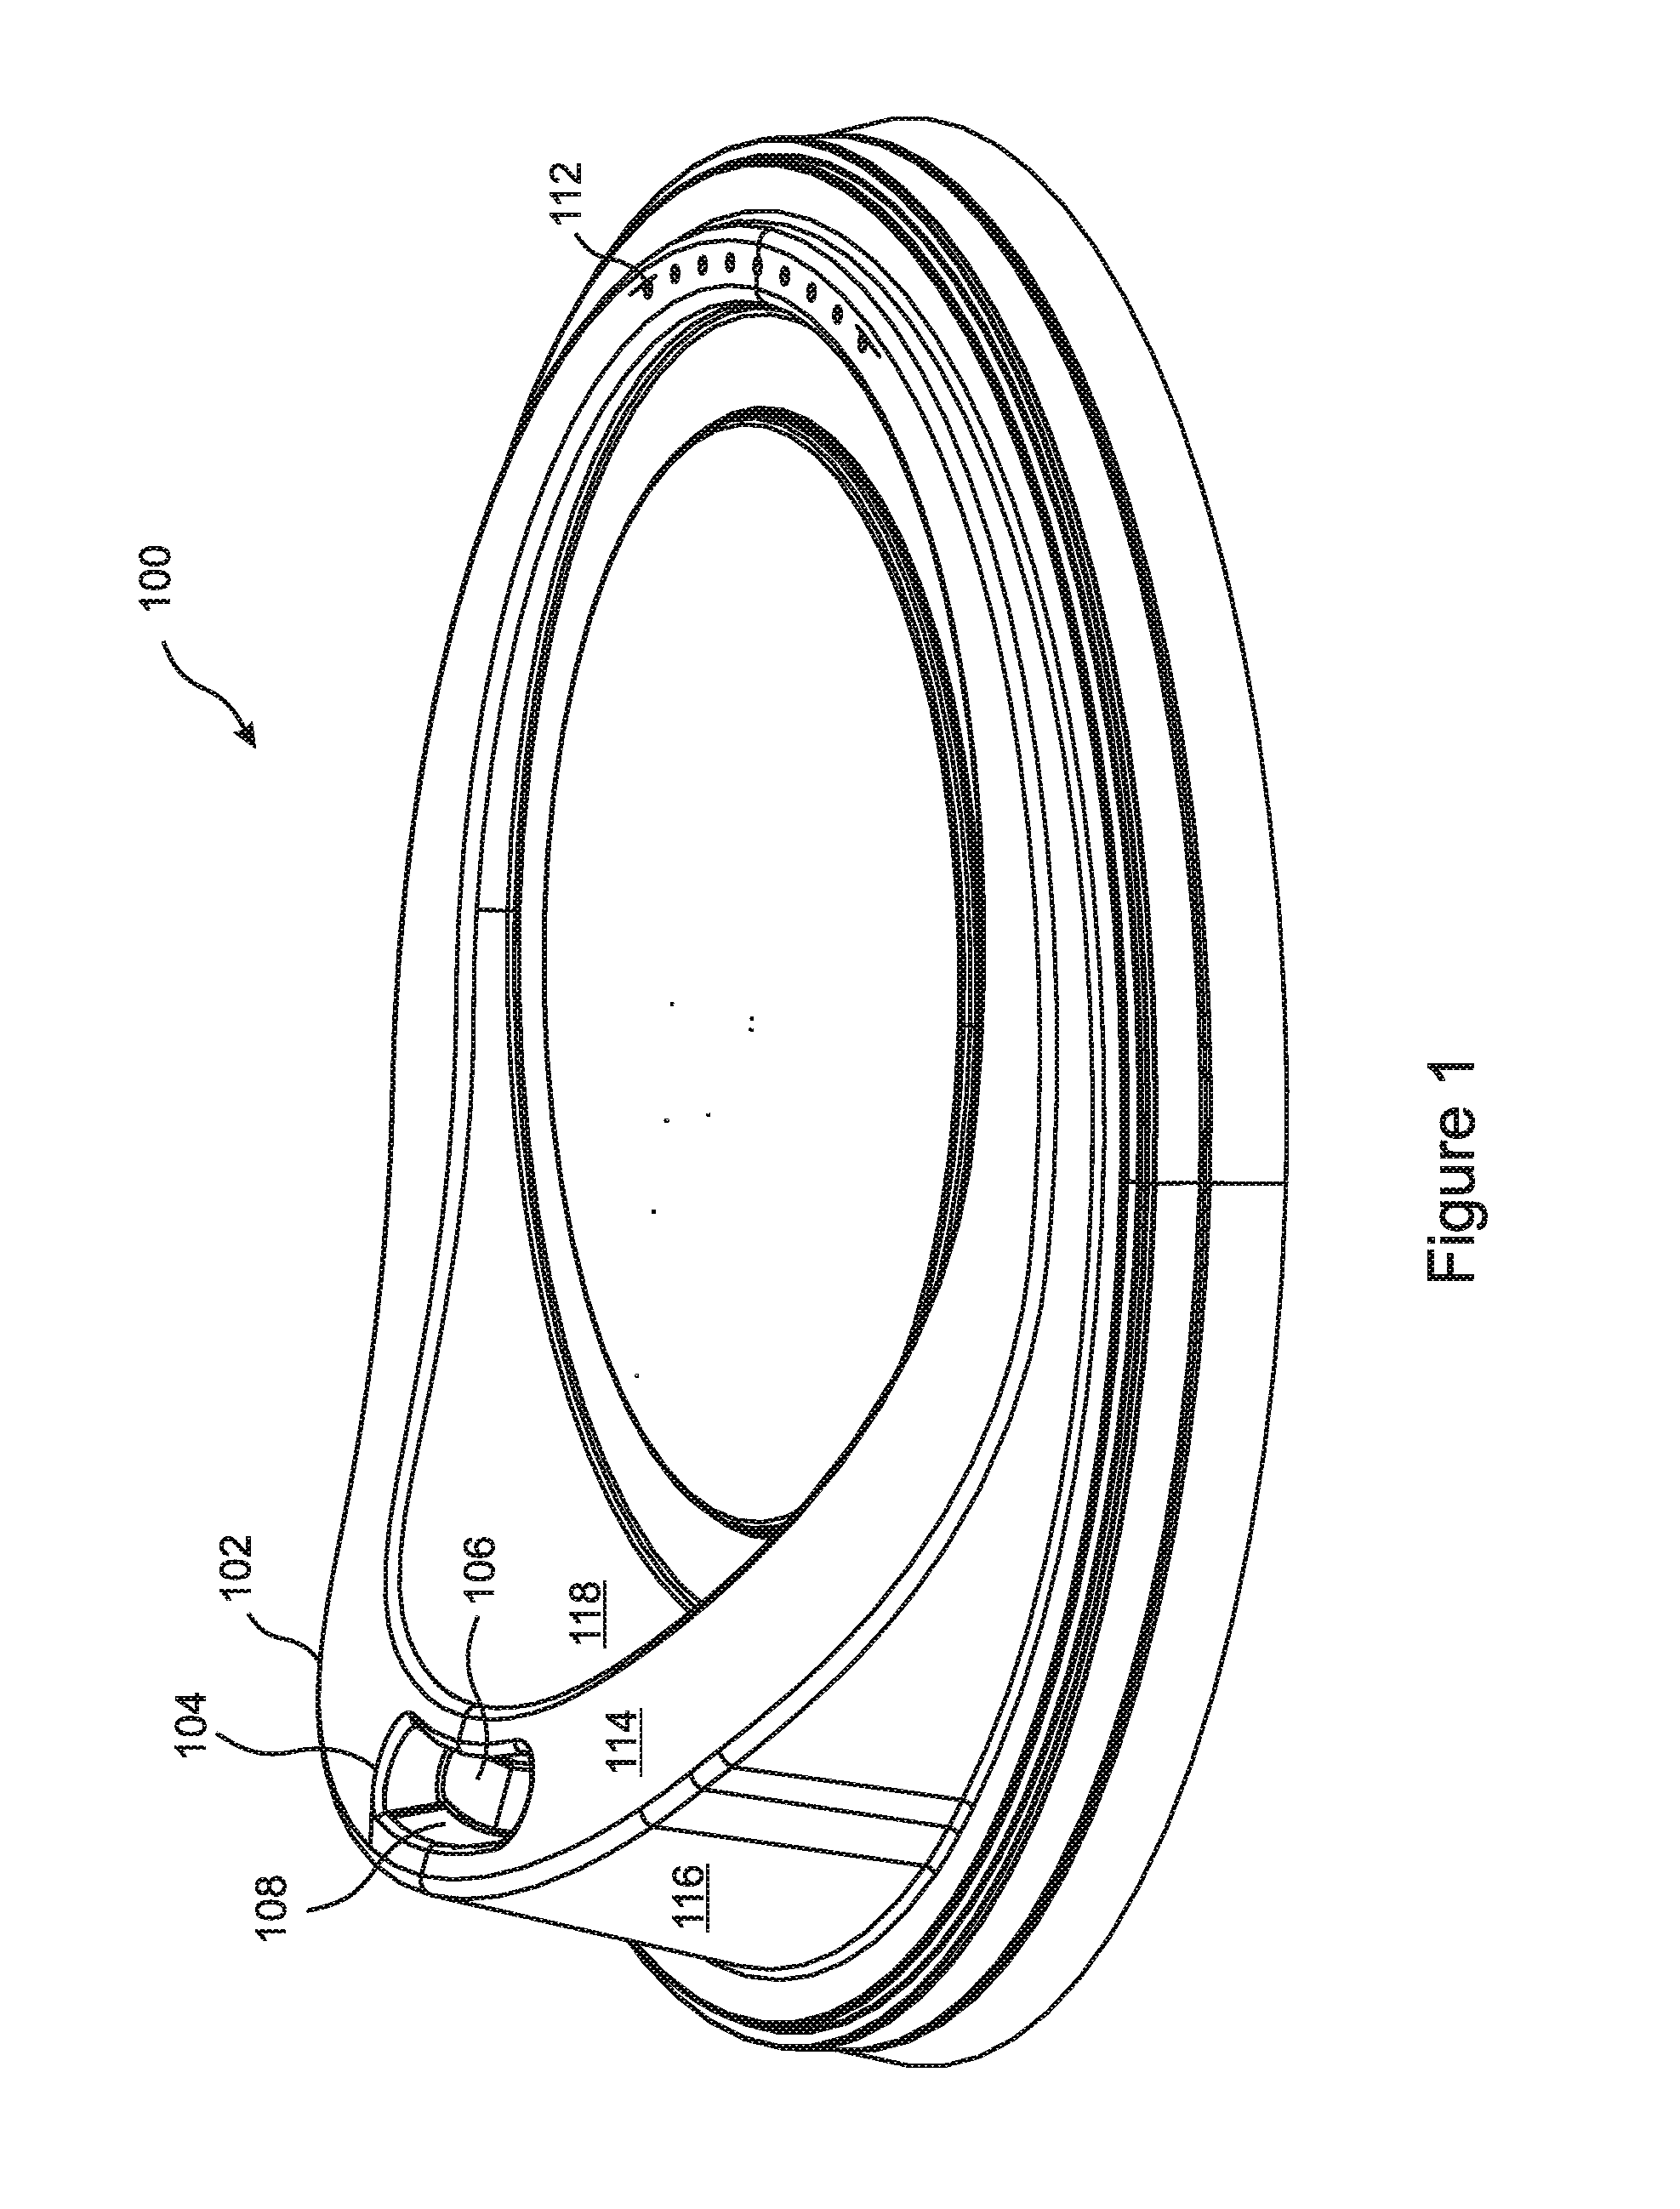 Two-piece splash and spill resistant lid assembly and method therefor